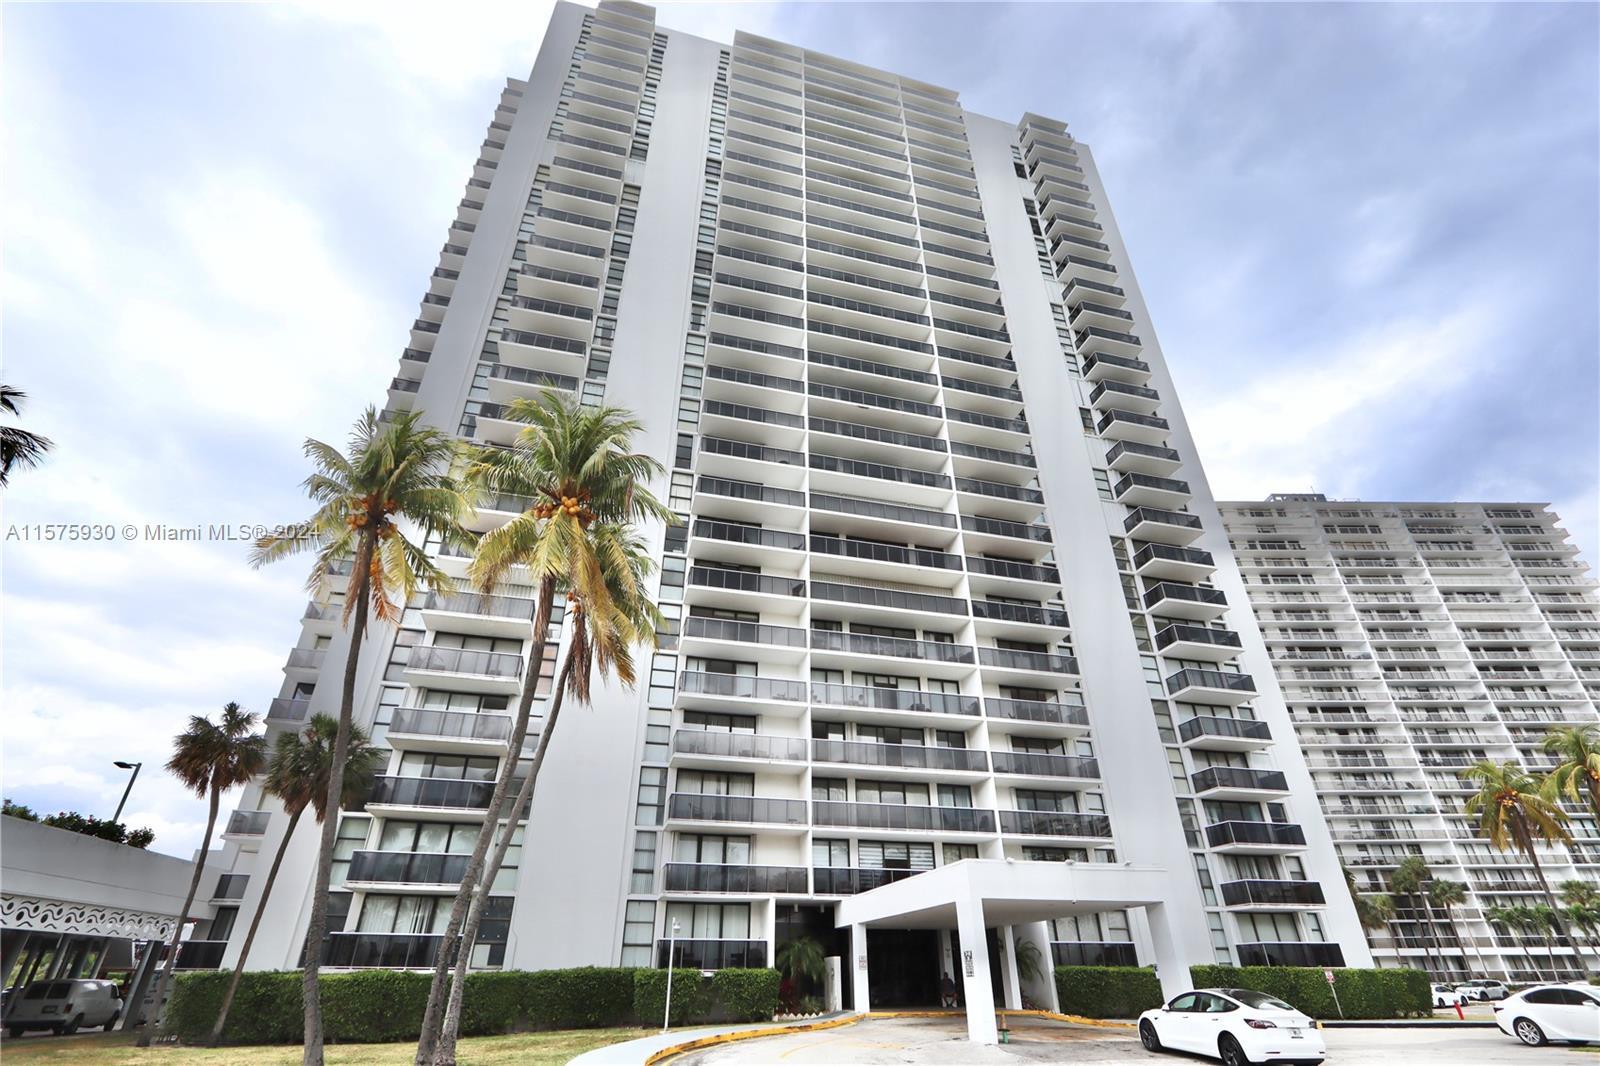 EXPERIENCE LUXURY LIVING IN THIS AVENTURA, FLORIDA LARGE 1 BEDROOM CONVERTIBLE, WITH 1.5 BATHS CONDO